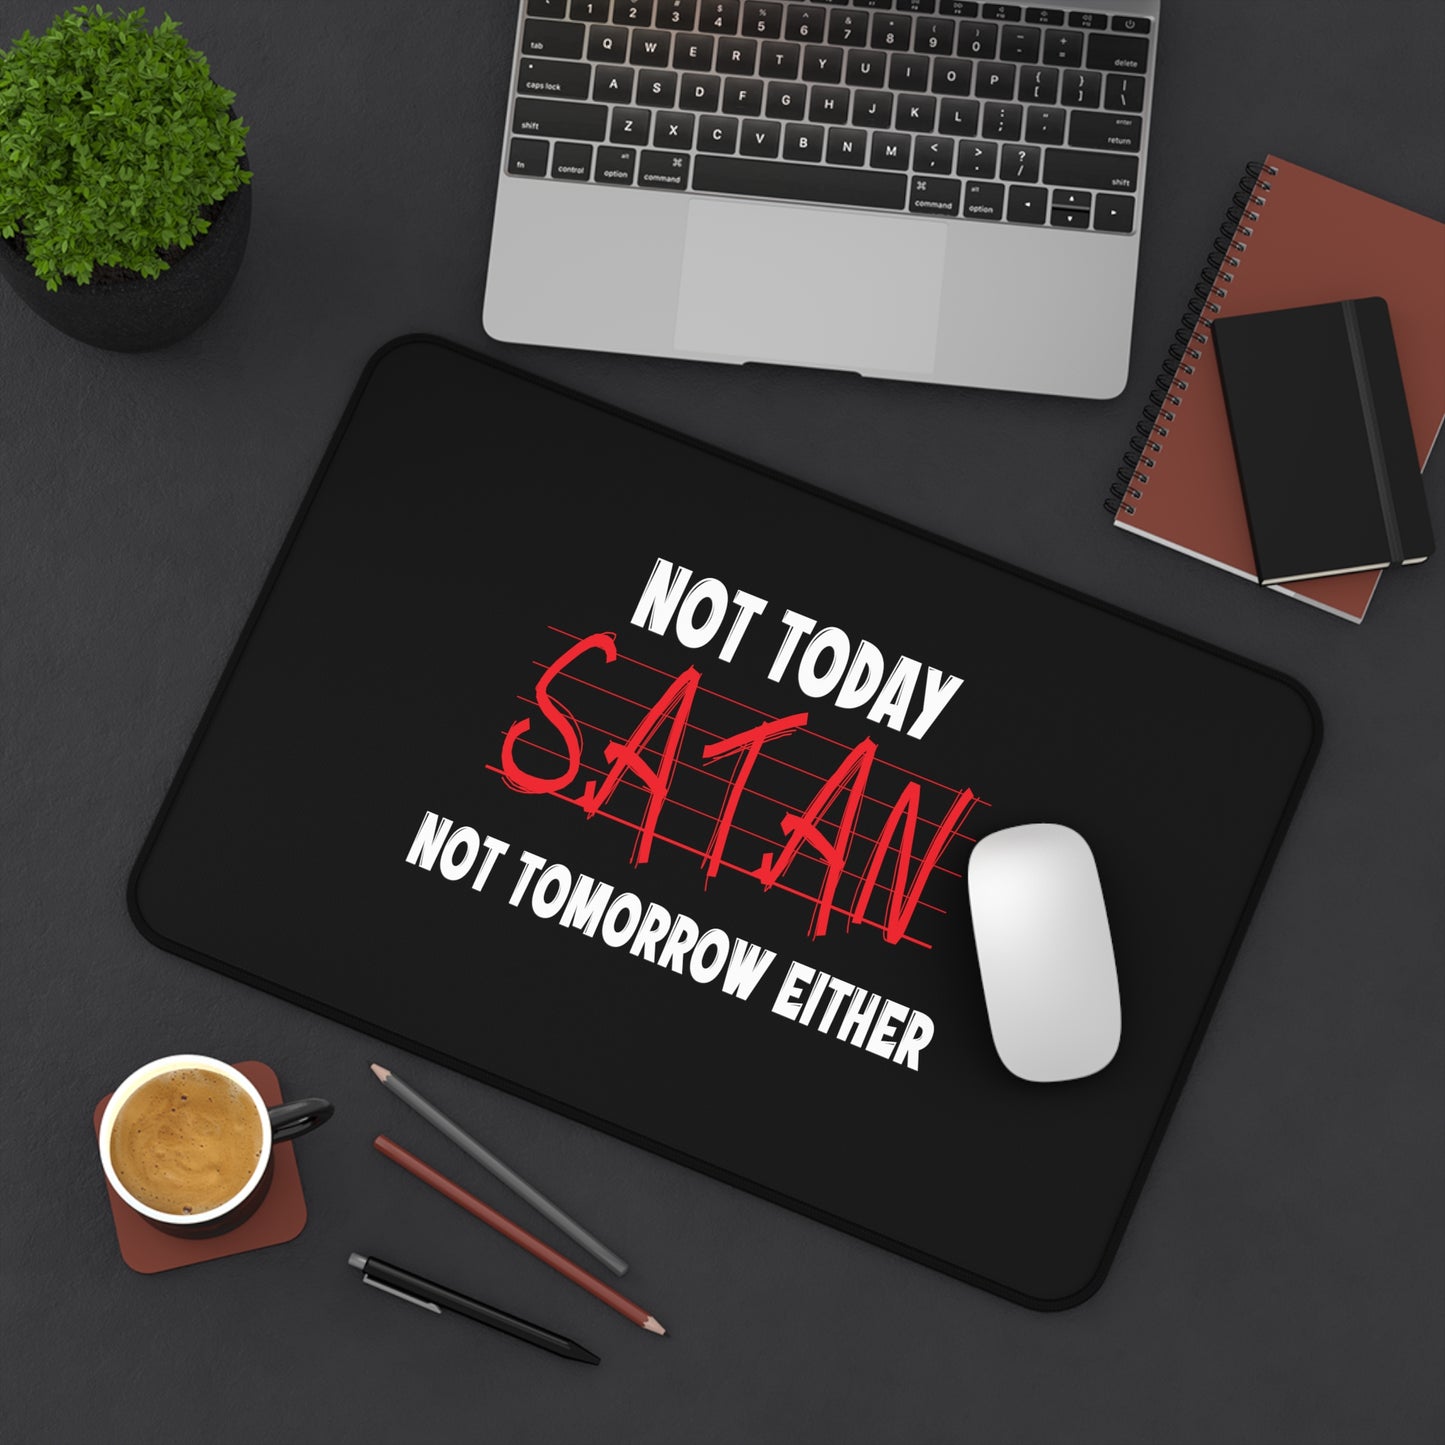 Not Today Satan Not Tomorrow Either Christian Computer Keyboard Mouse Desk Mat